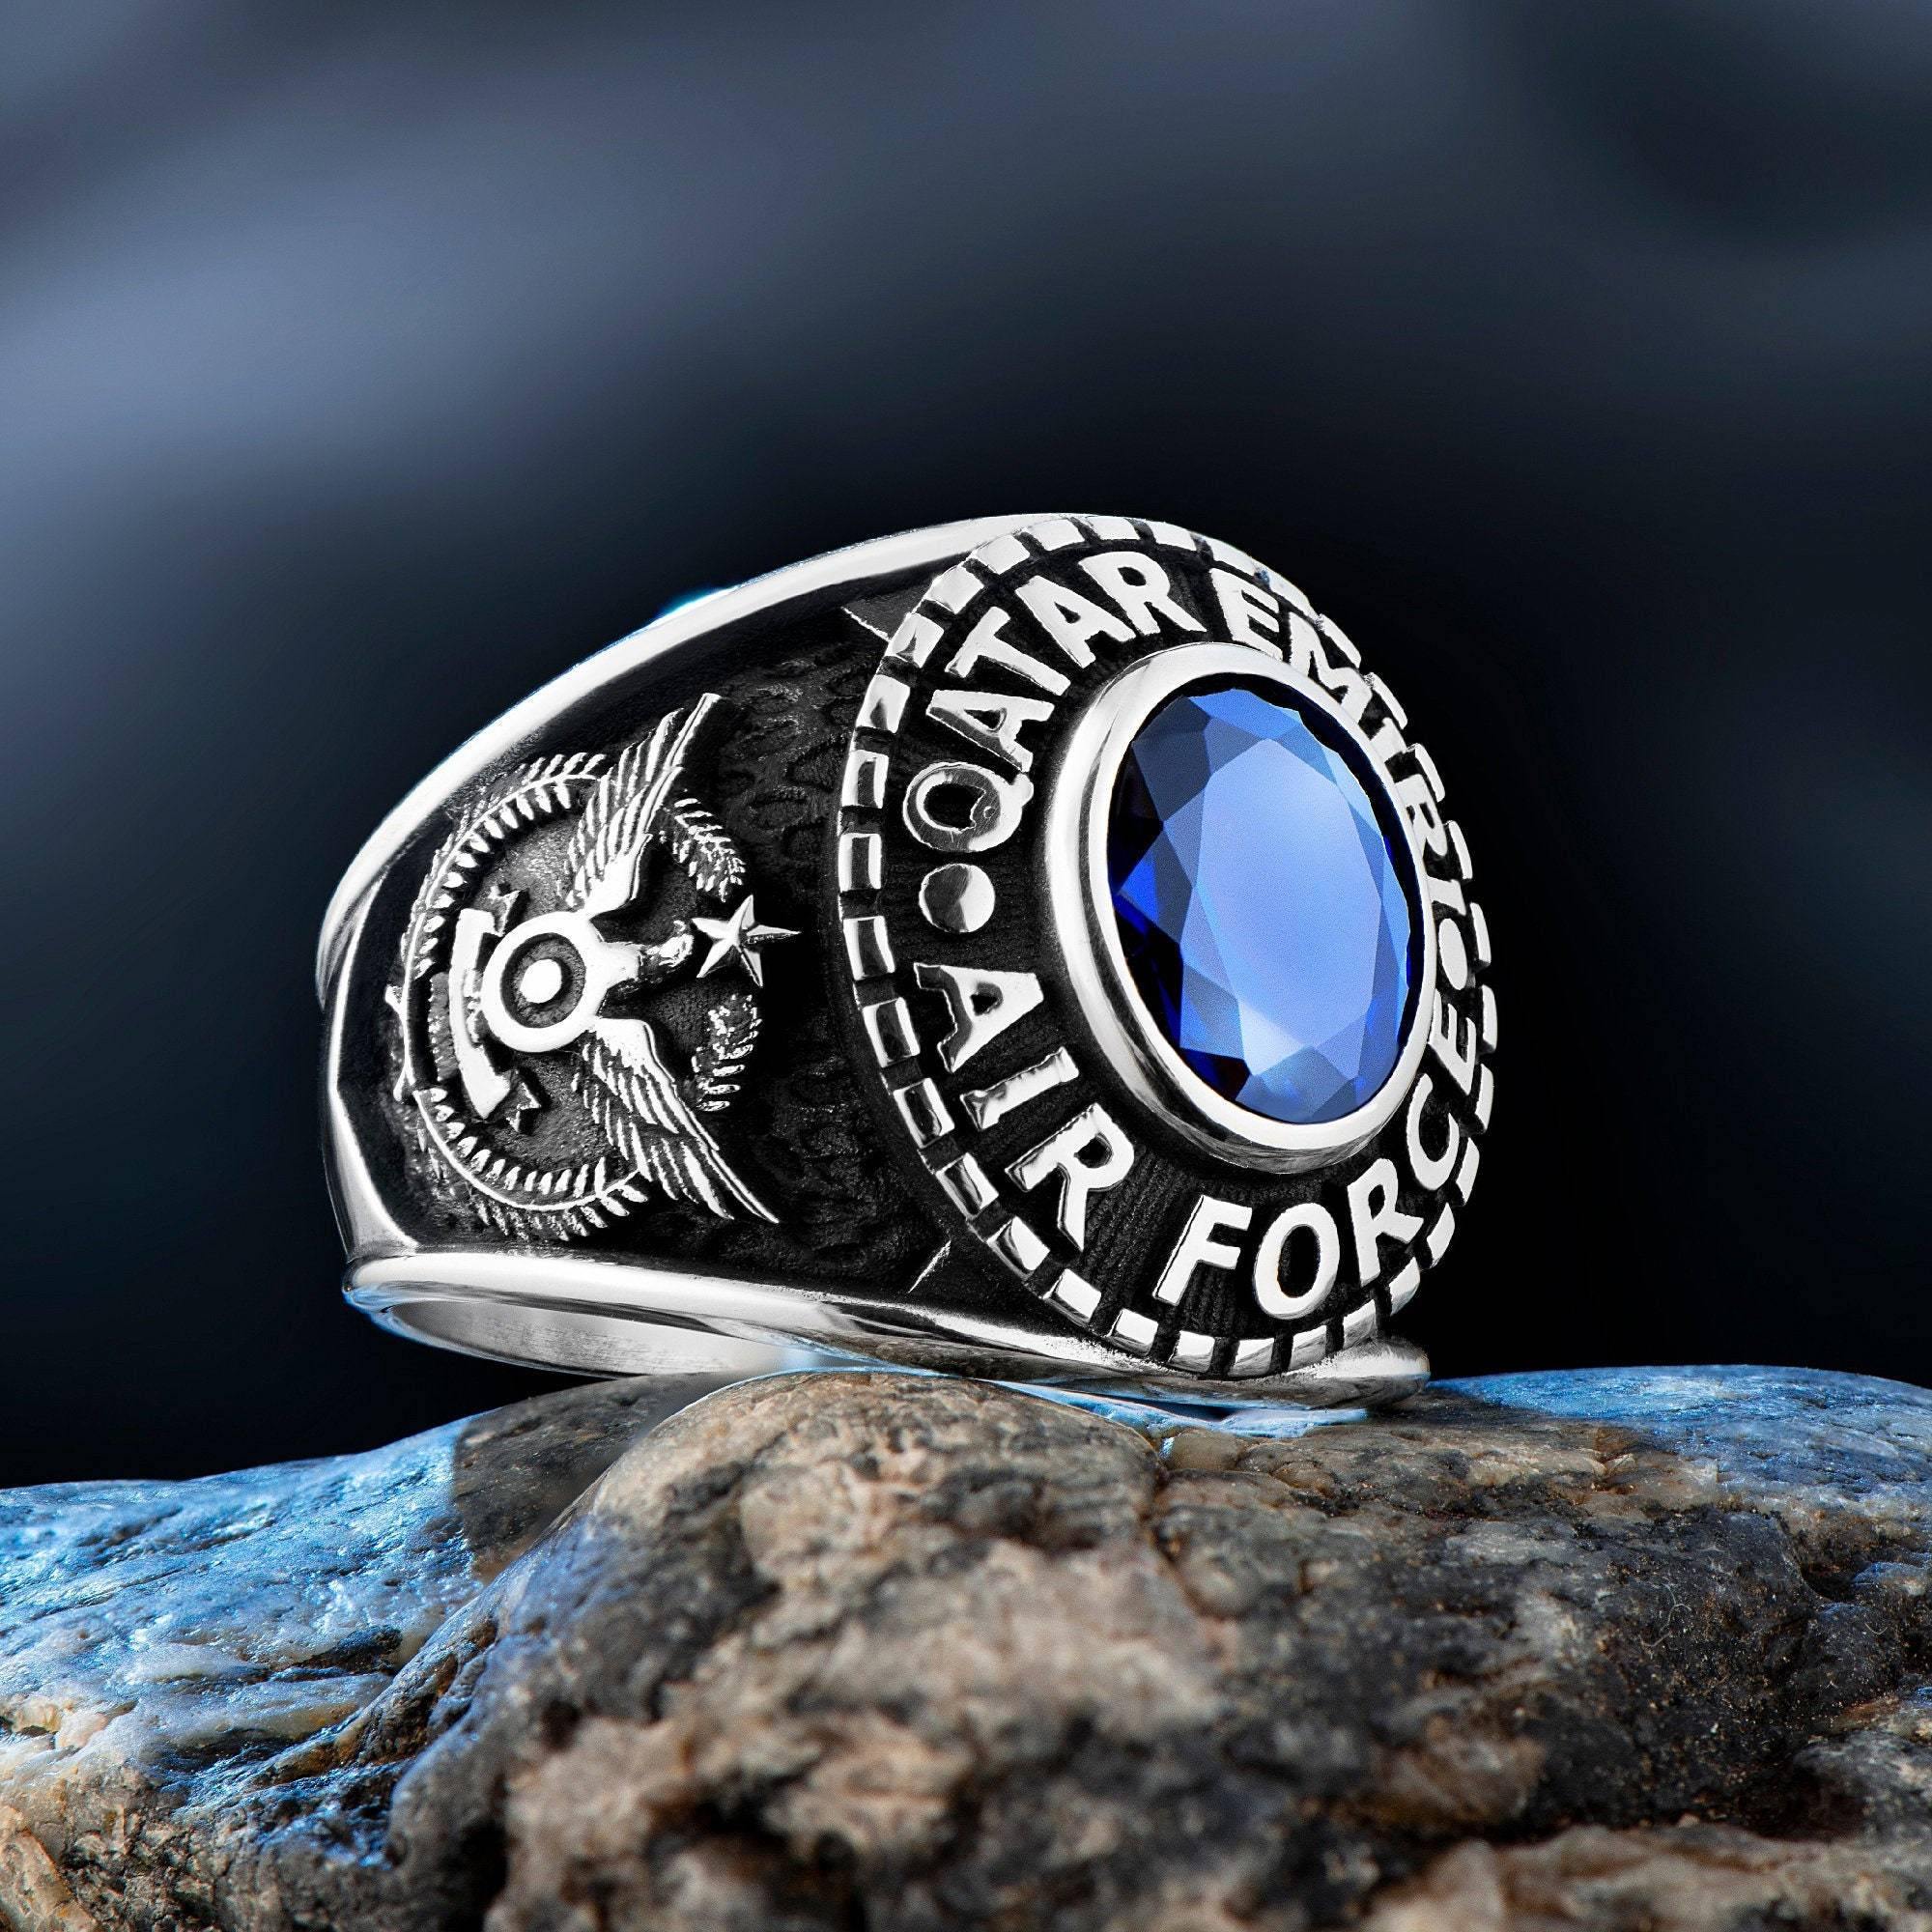 Qatar Emiri Air Force Ring, Military Rings with Blue Zircon Gemstone - OXO SILVER